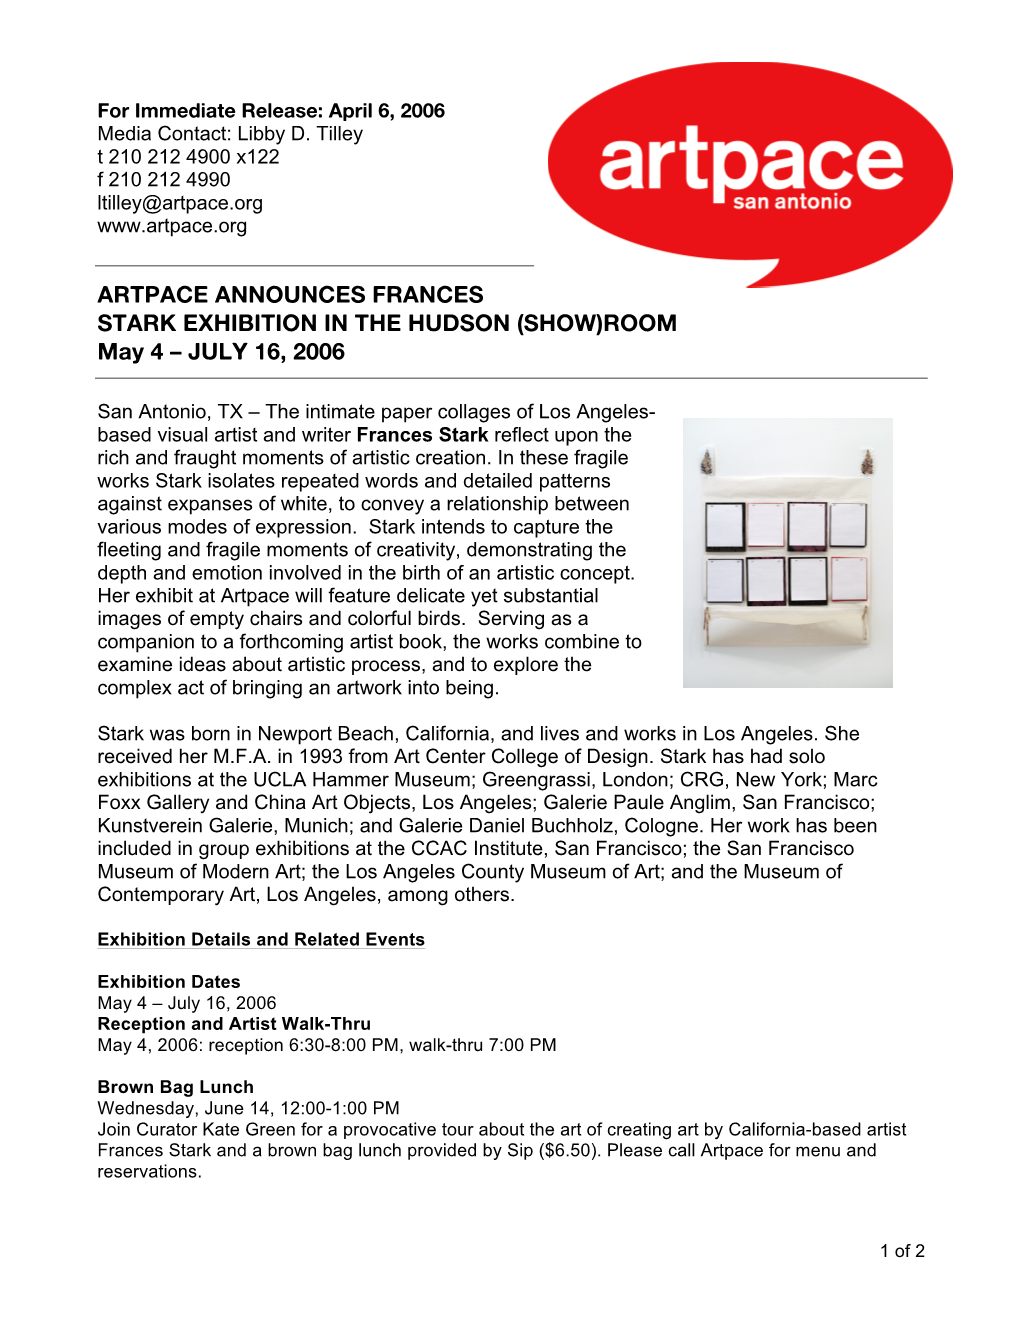 ARTPACE ANNOUNCES FRANCES STARK EXHIBITION in the HUDSON (SHOW)ROOM May 4 – JULY 16, 2006